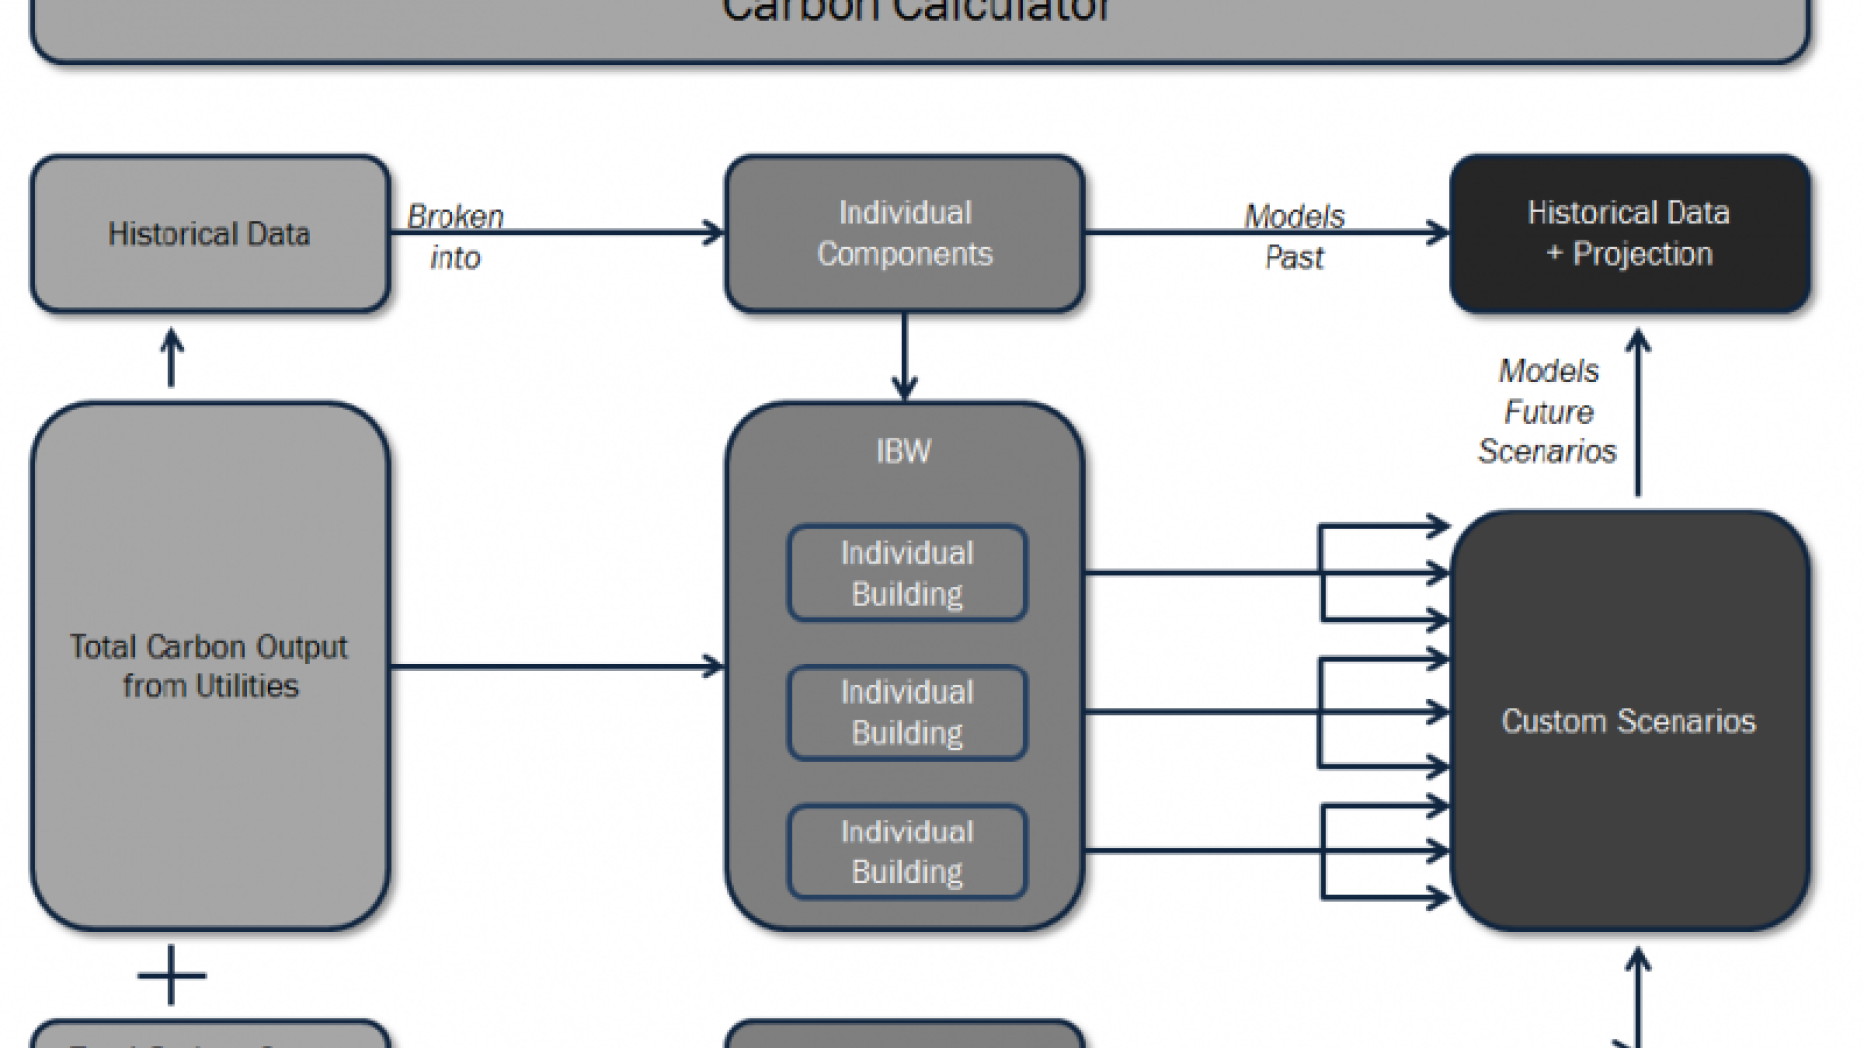 Flow chart of carbon on Penn campus.